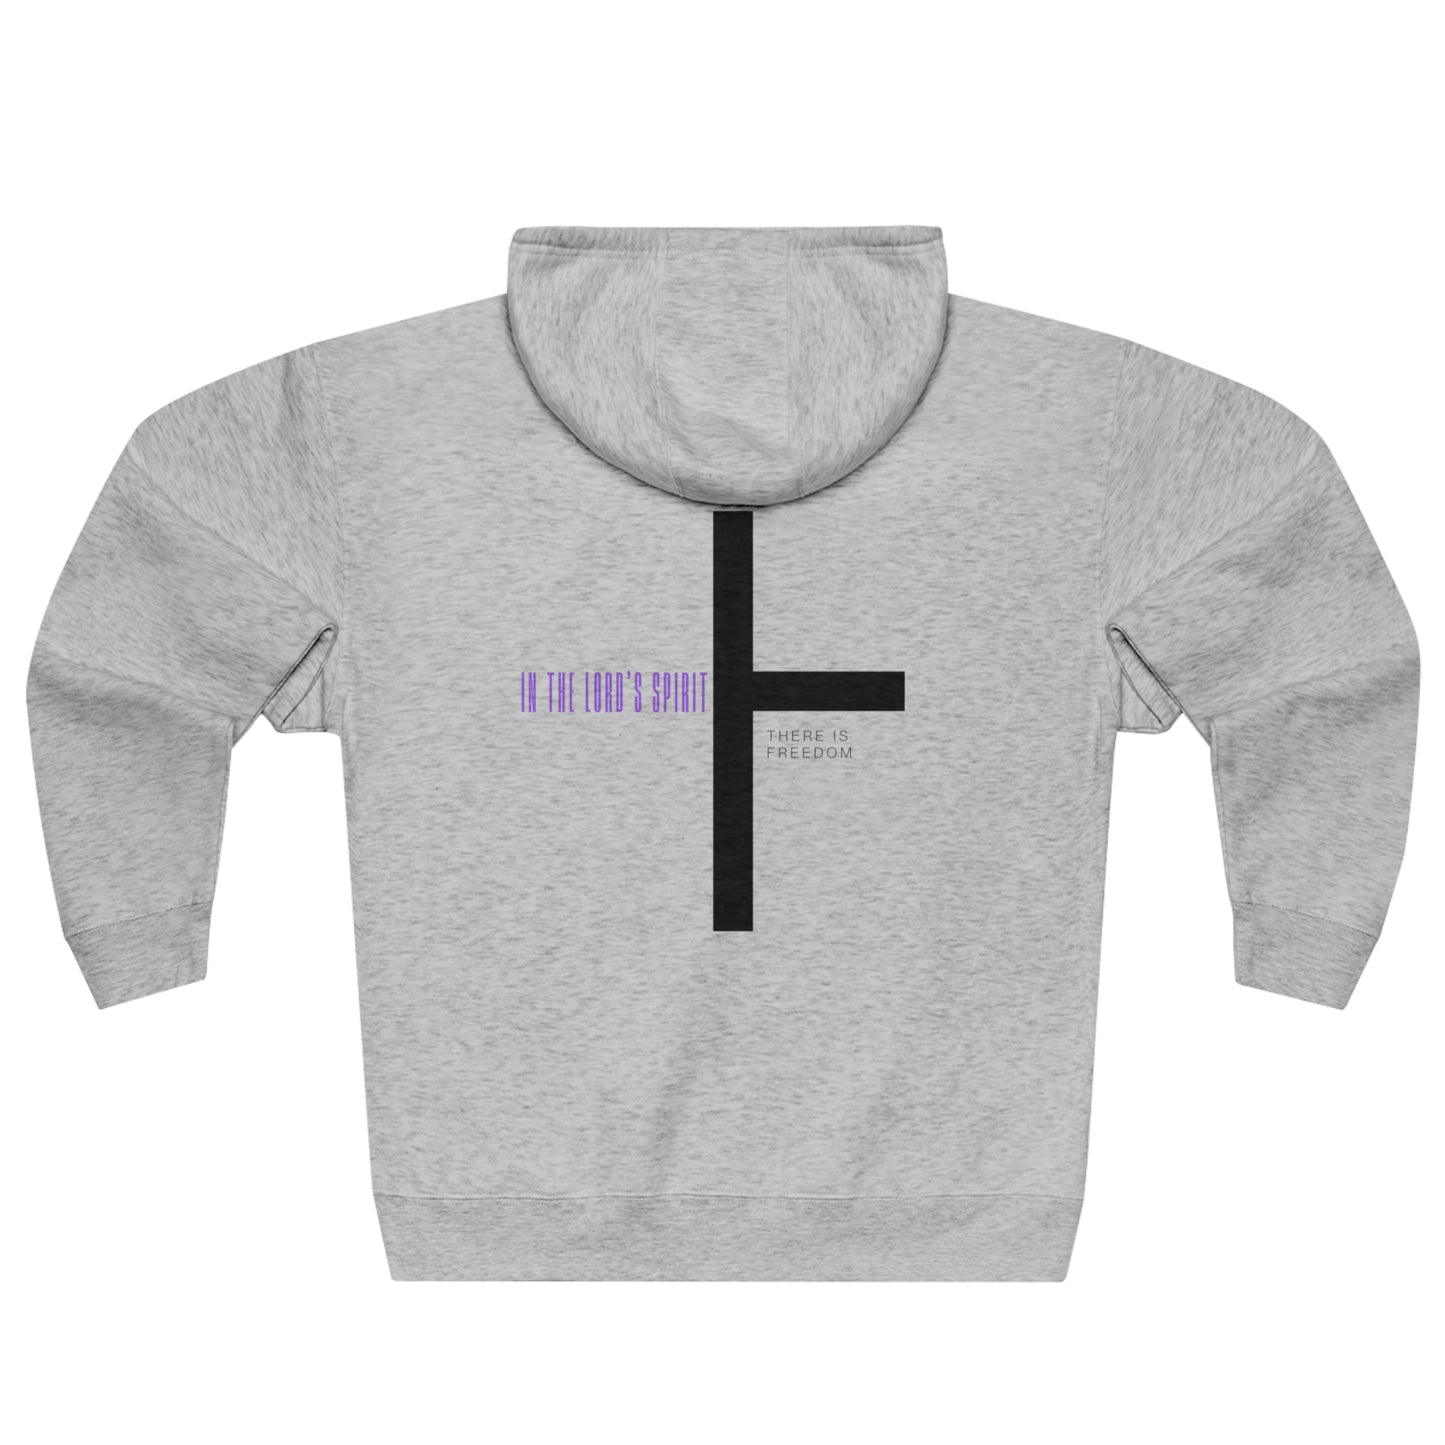 In The Lord Spirit There is Freedom Unisex Premium Full Zip Hoodie